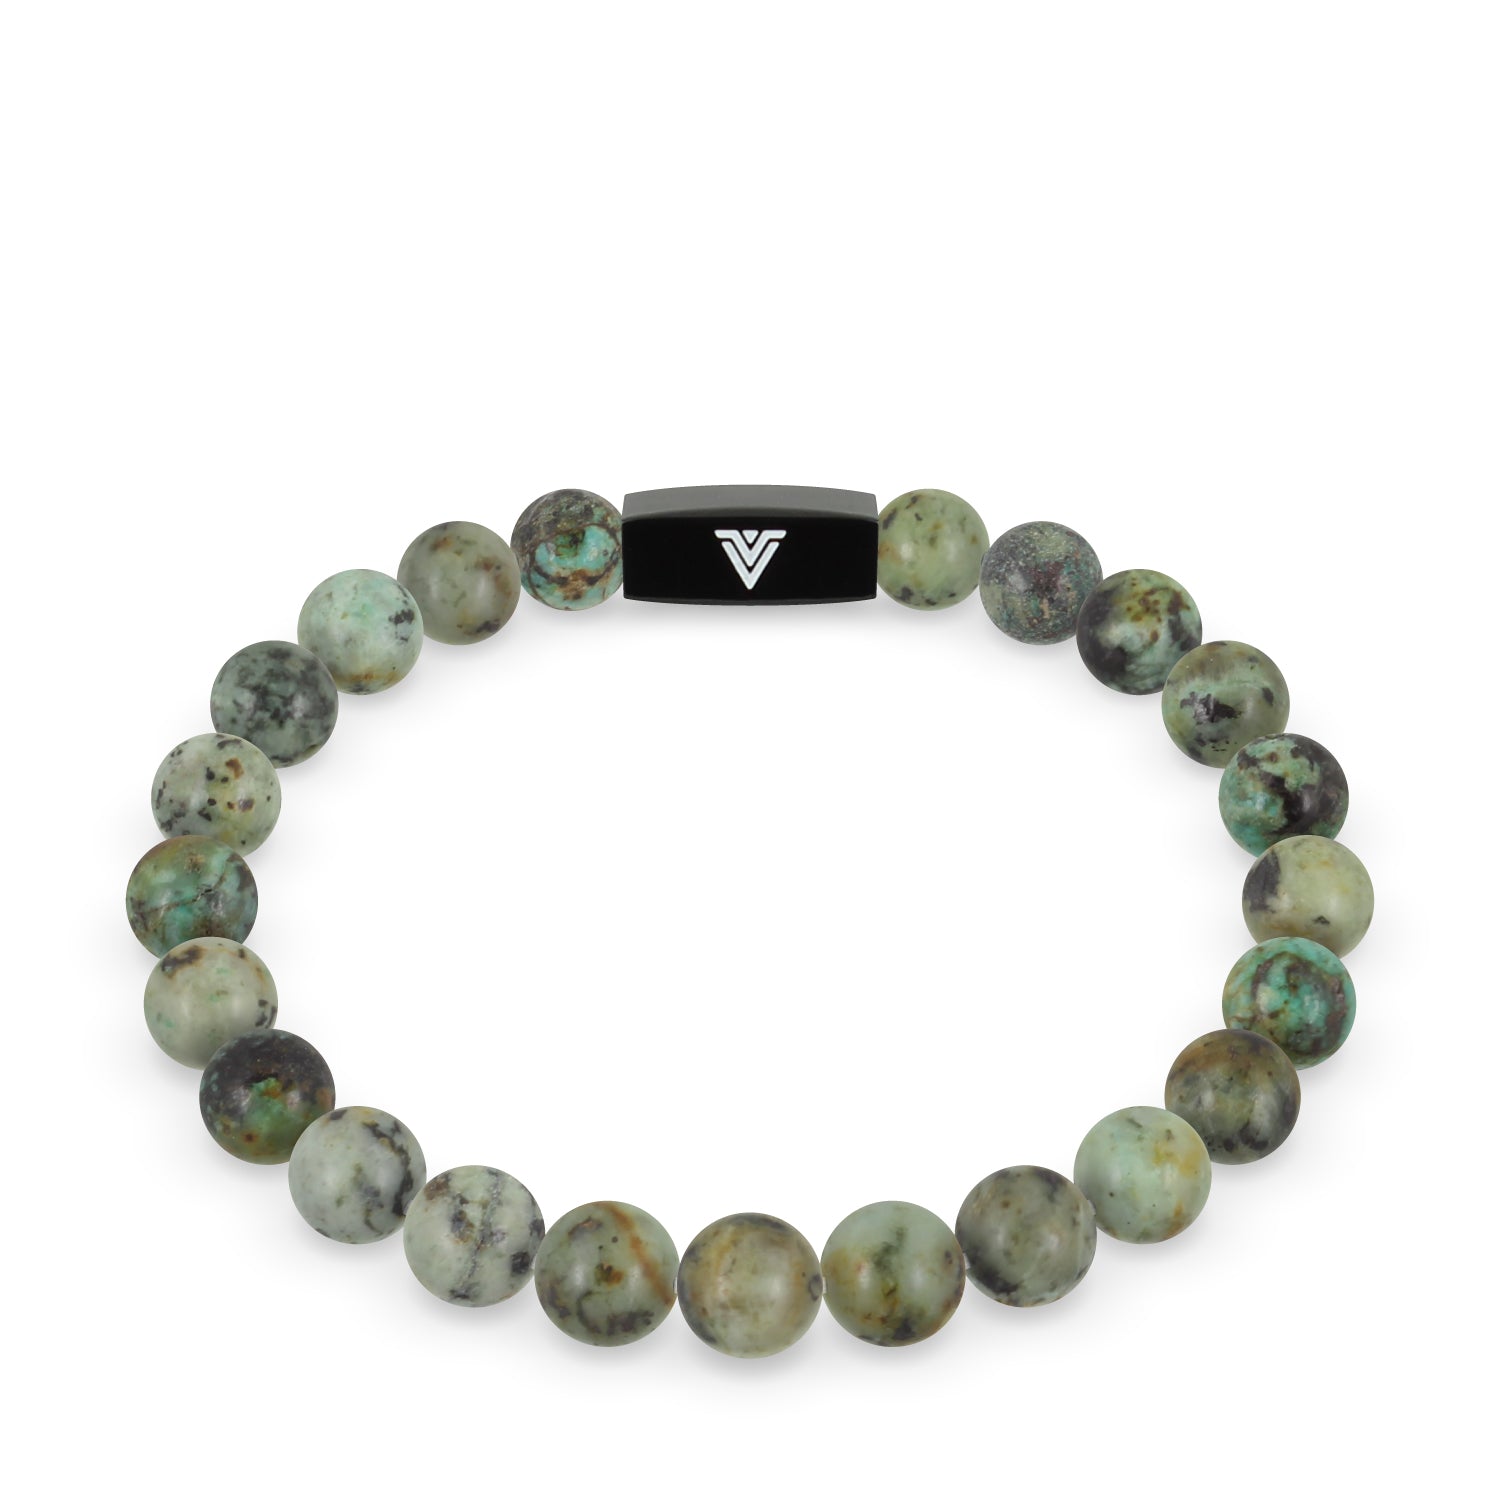 Front view of an 8mm African Turquoise crystal beaded stretch bracelet with black stainless steel logo bead made by Voltlin